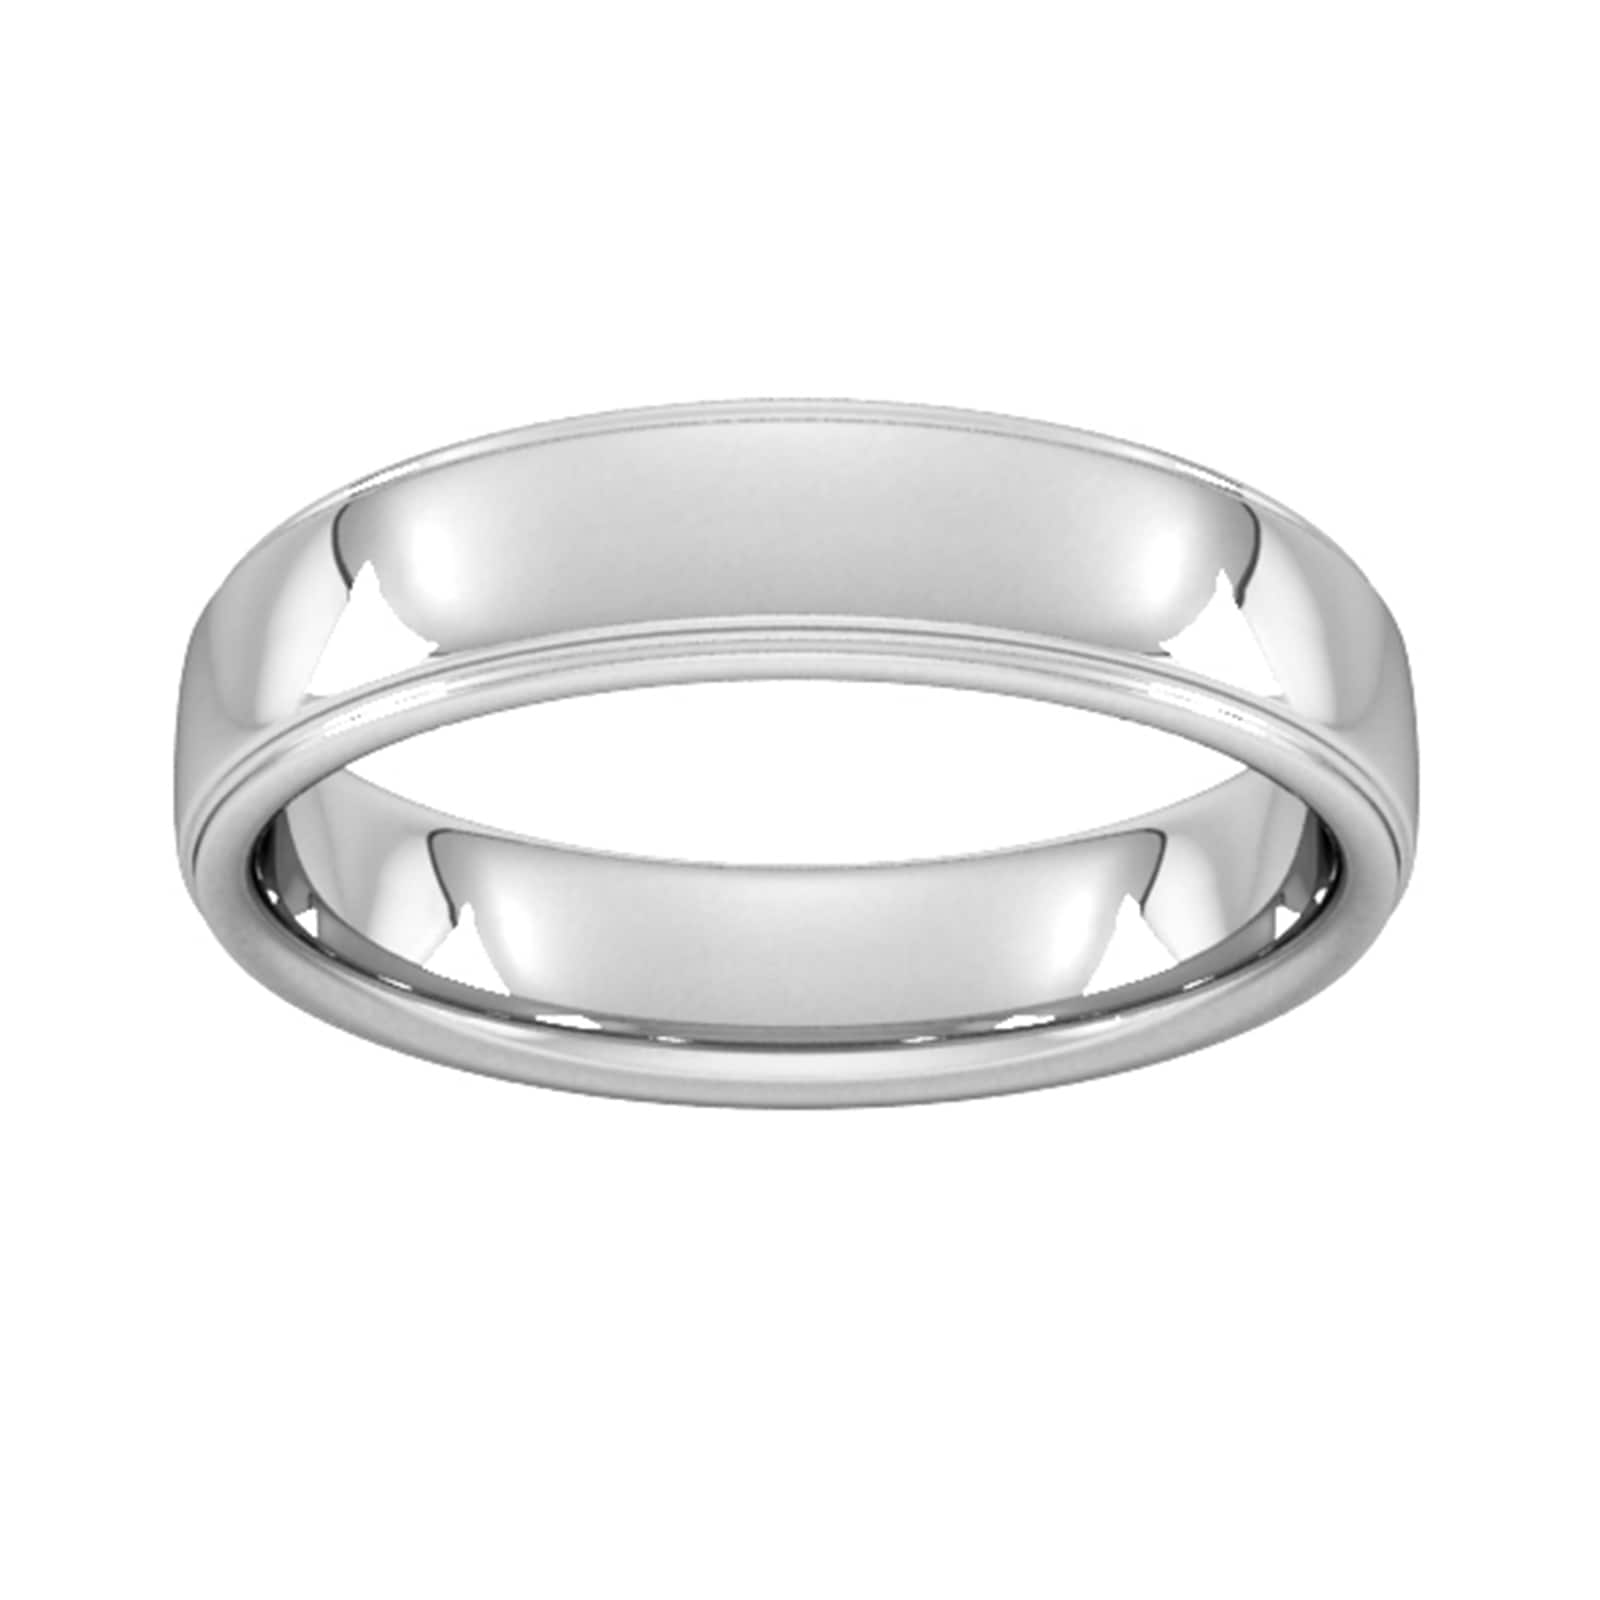 5mm Slight Court Heavy Polished Finish With Grooves Wedding Ring In 9 Carat White Gold - Ring Size Y